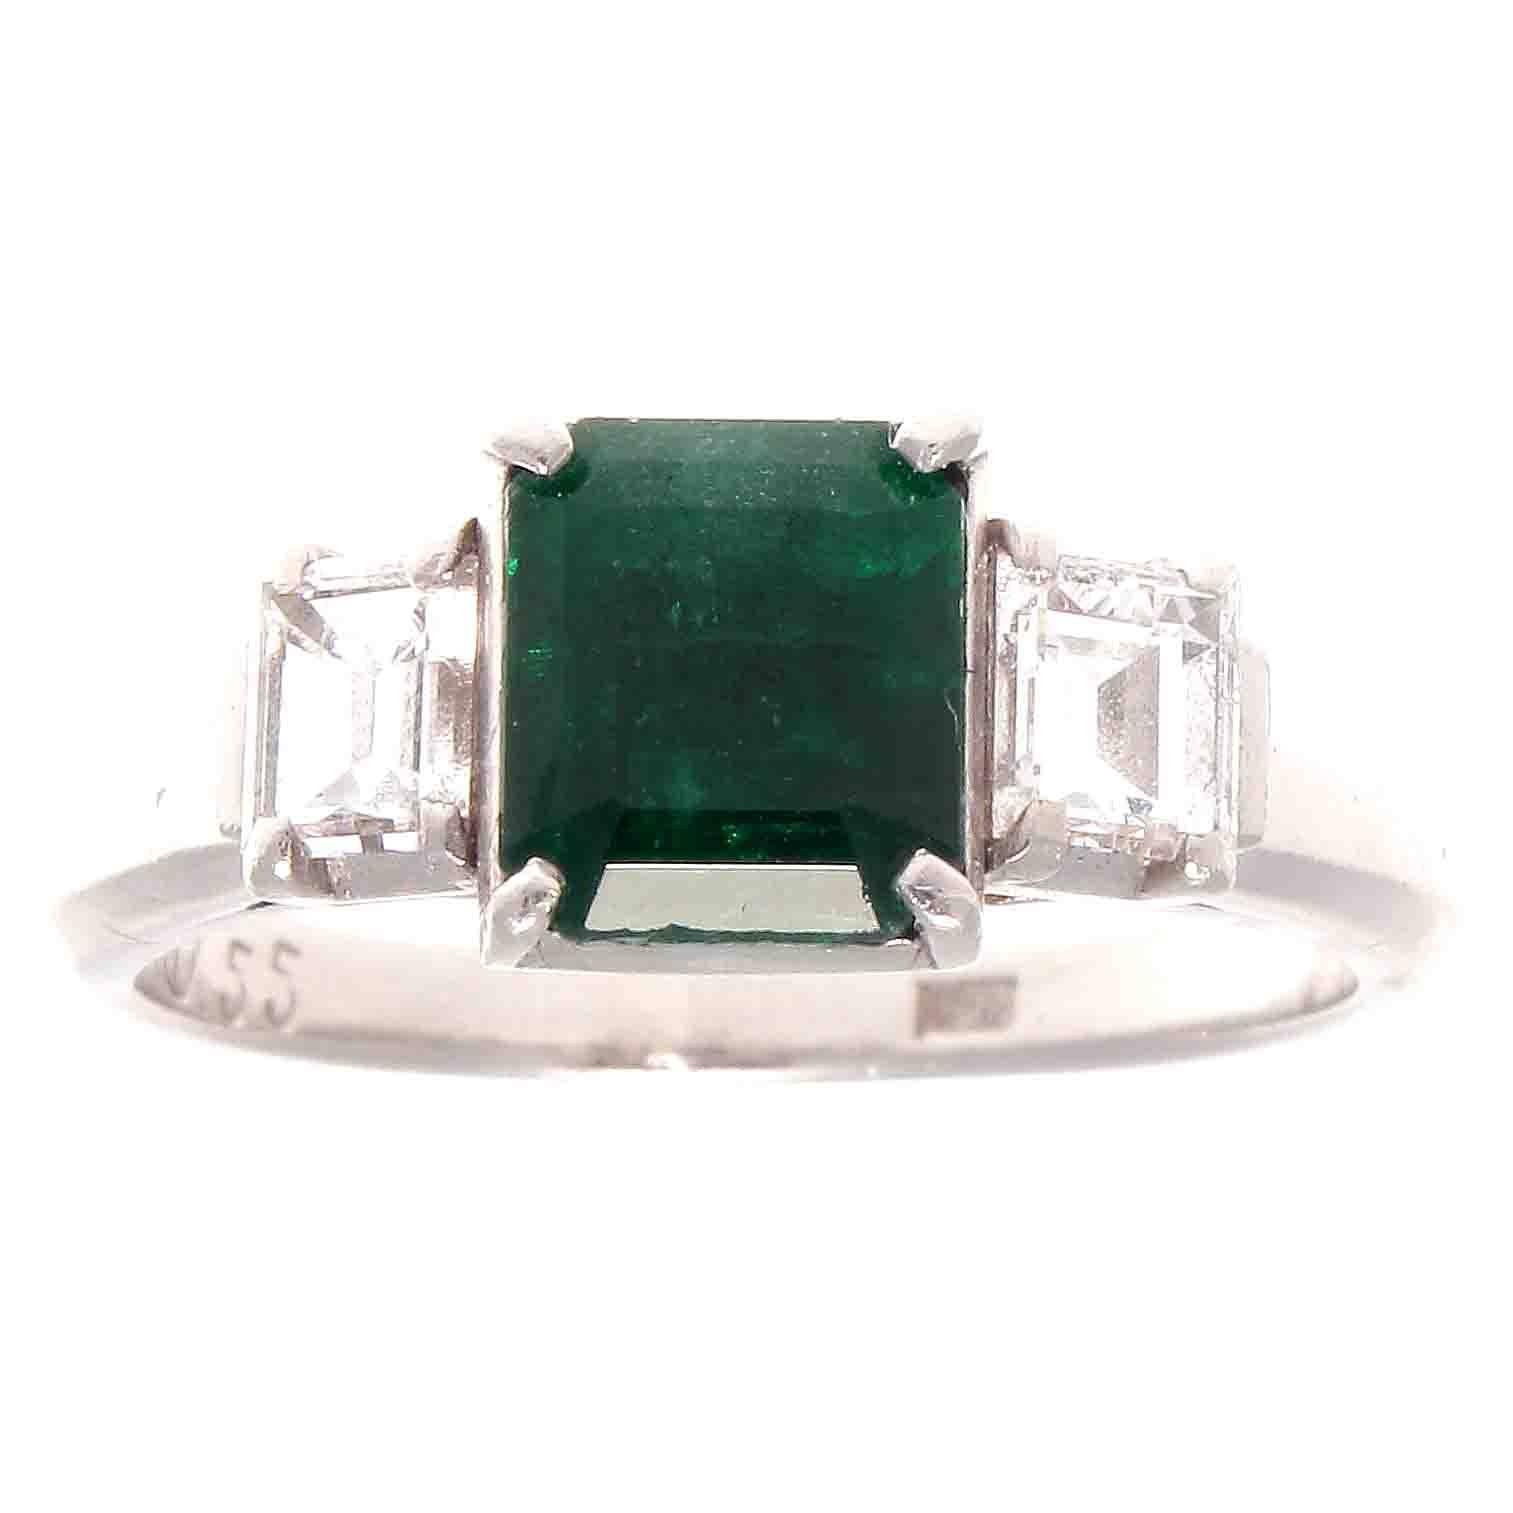 A classic creation and style that has survived many decades of change. Featuring a 1.22 carat forest green emerald that is perfectly complimented by 2 colorless emerald cut diamonds weighing a total of 0.55 carats. Crafted in platinum.

Ring size 6